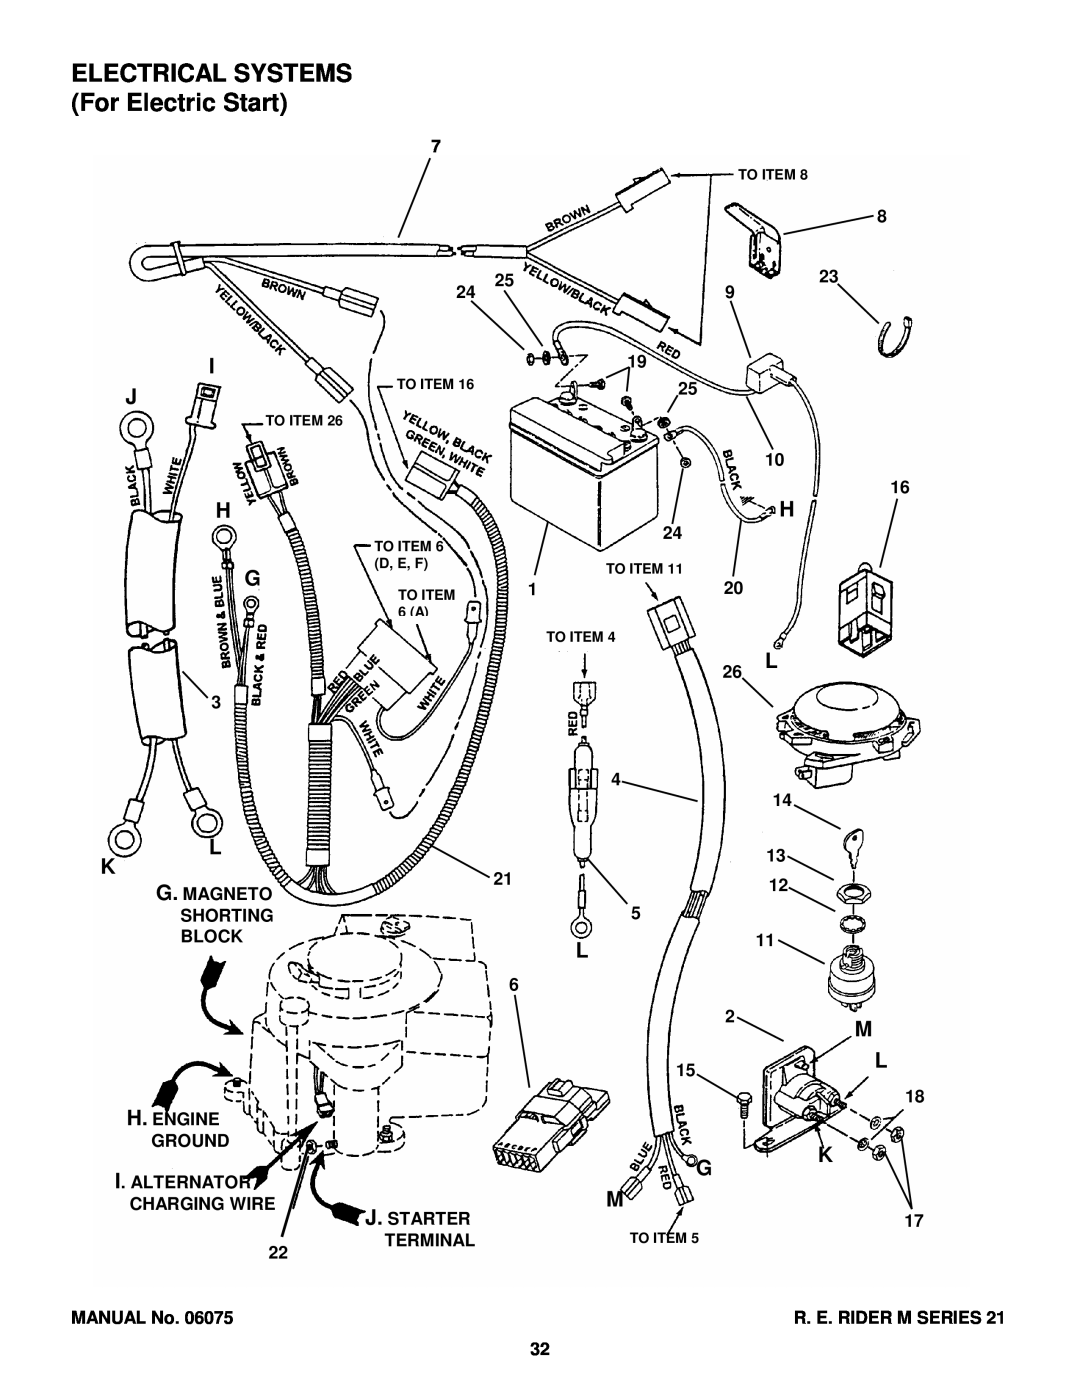 Snapper EM281021BE, M300921B, EM250821BE, WM301021BE, WM280921B manual ELECTRICAL SYSTEMS For Electric Start 